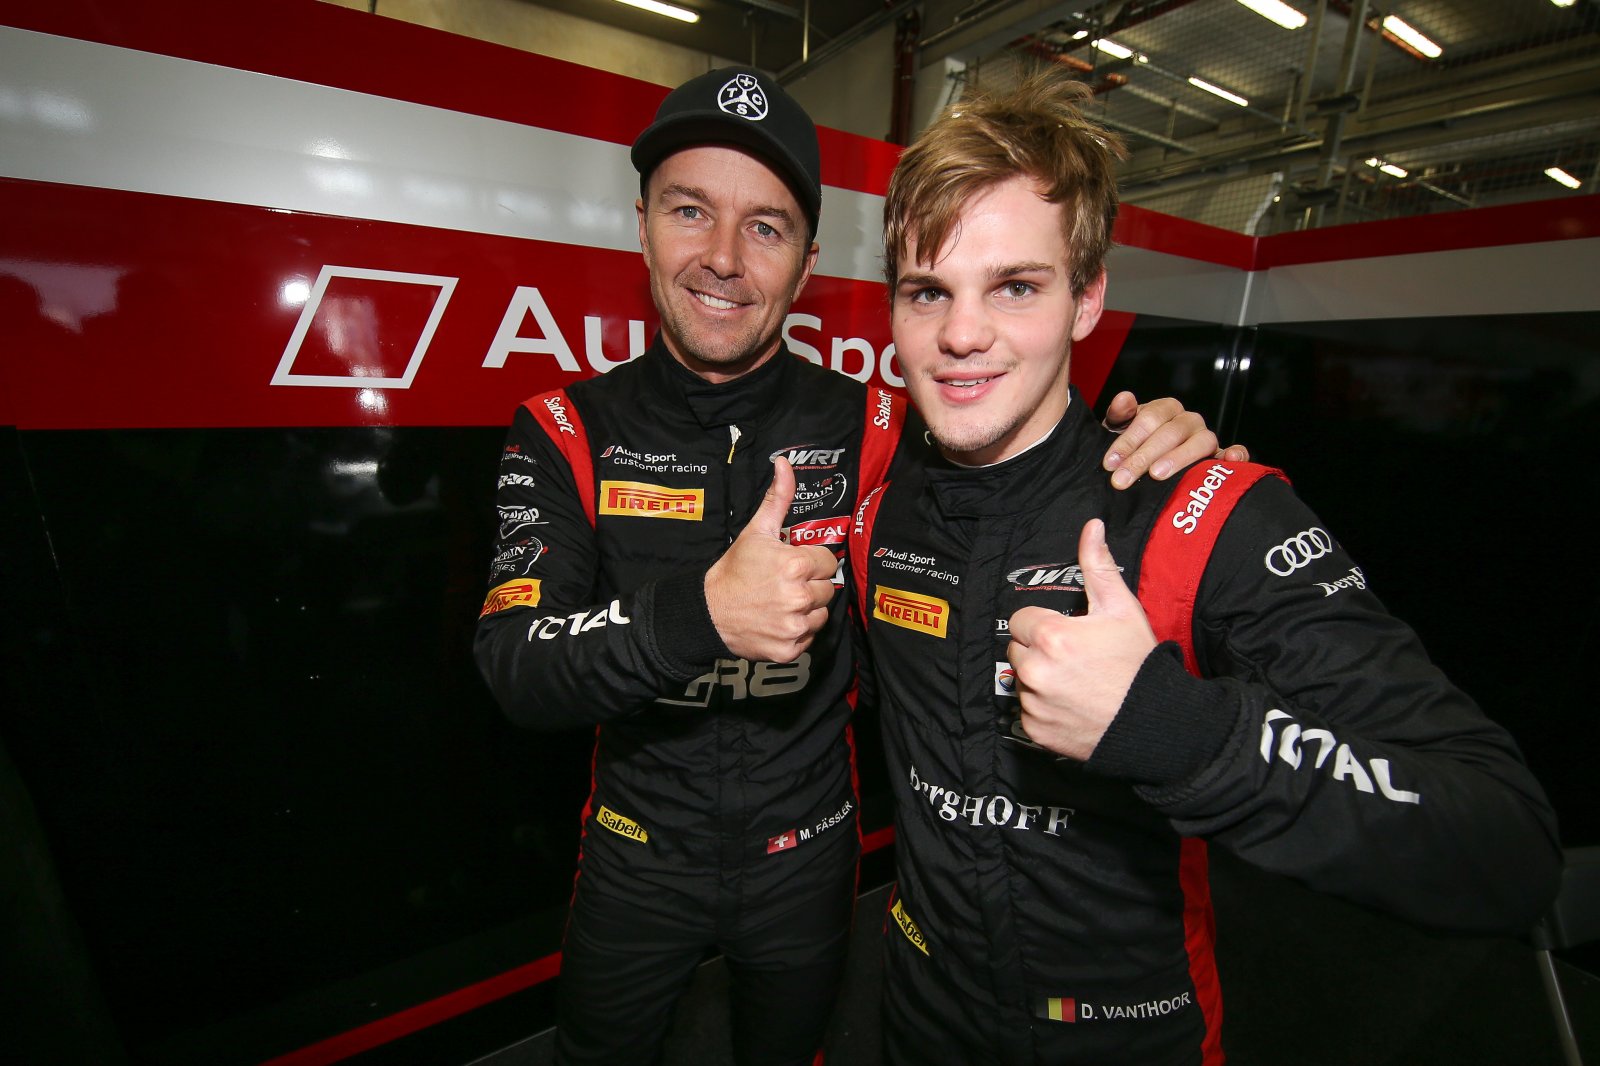 Second consecutive pole for Dries Vanthoor